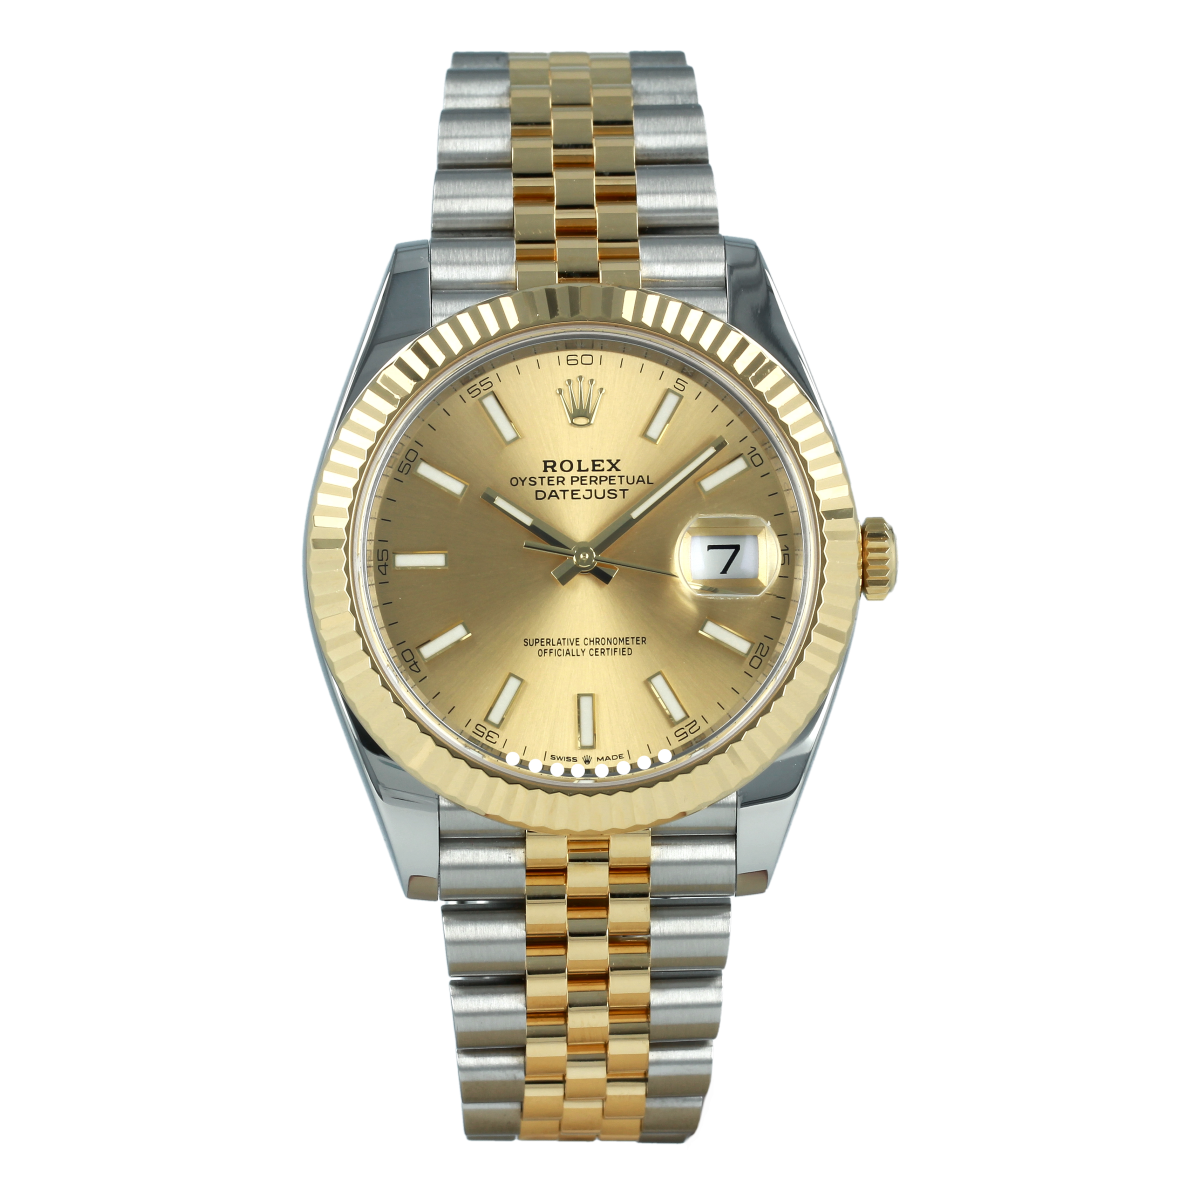 Rolex Datejust 126333 41mm Champagne Dial Steel and Yellow Gold | Buy pre-owned Rolex watch